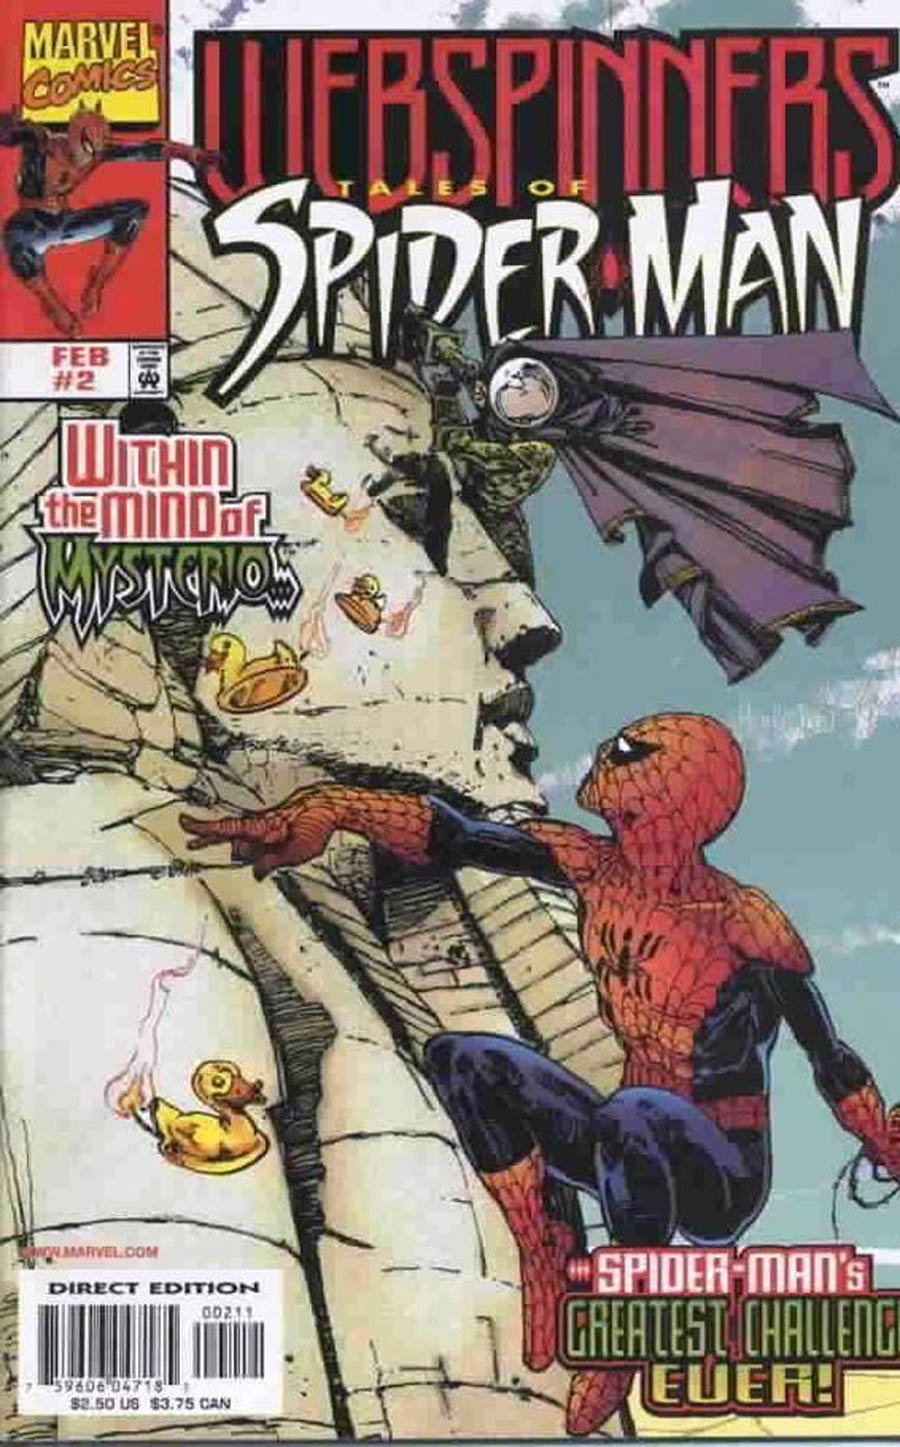 Webspinners Tales Of Spider-Man #2 Cover A